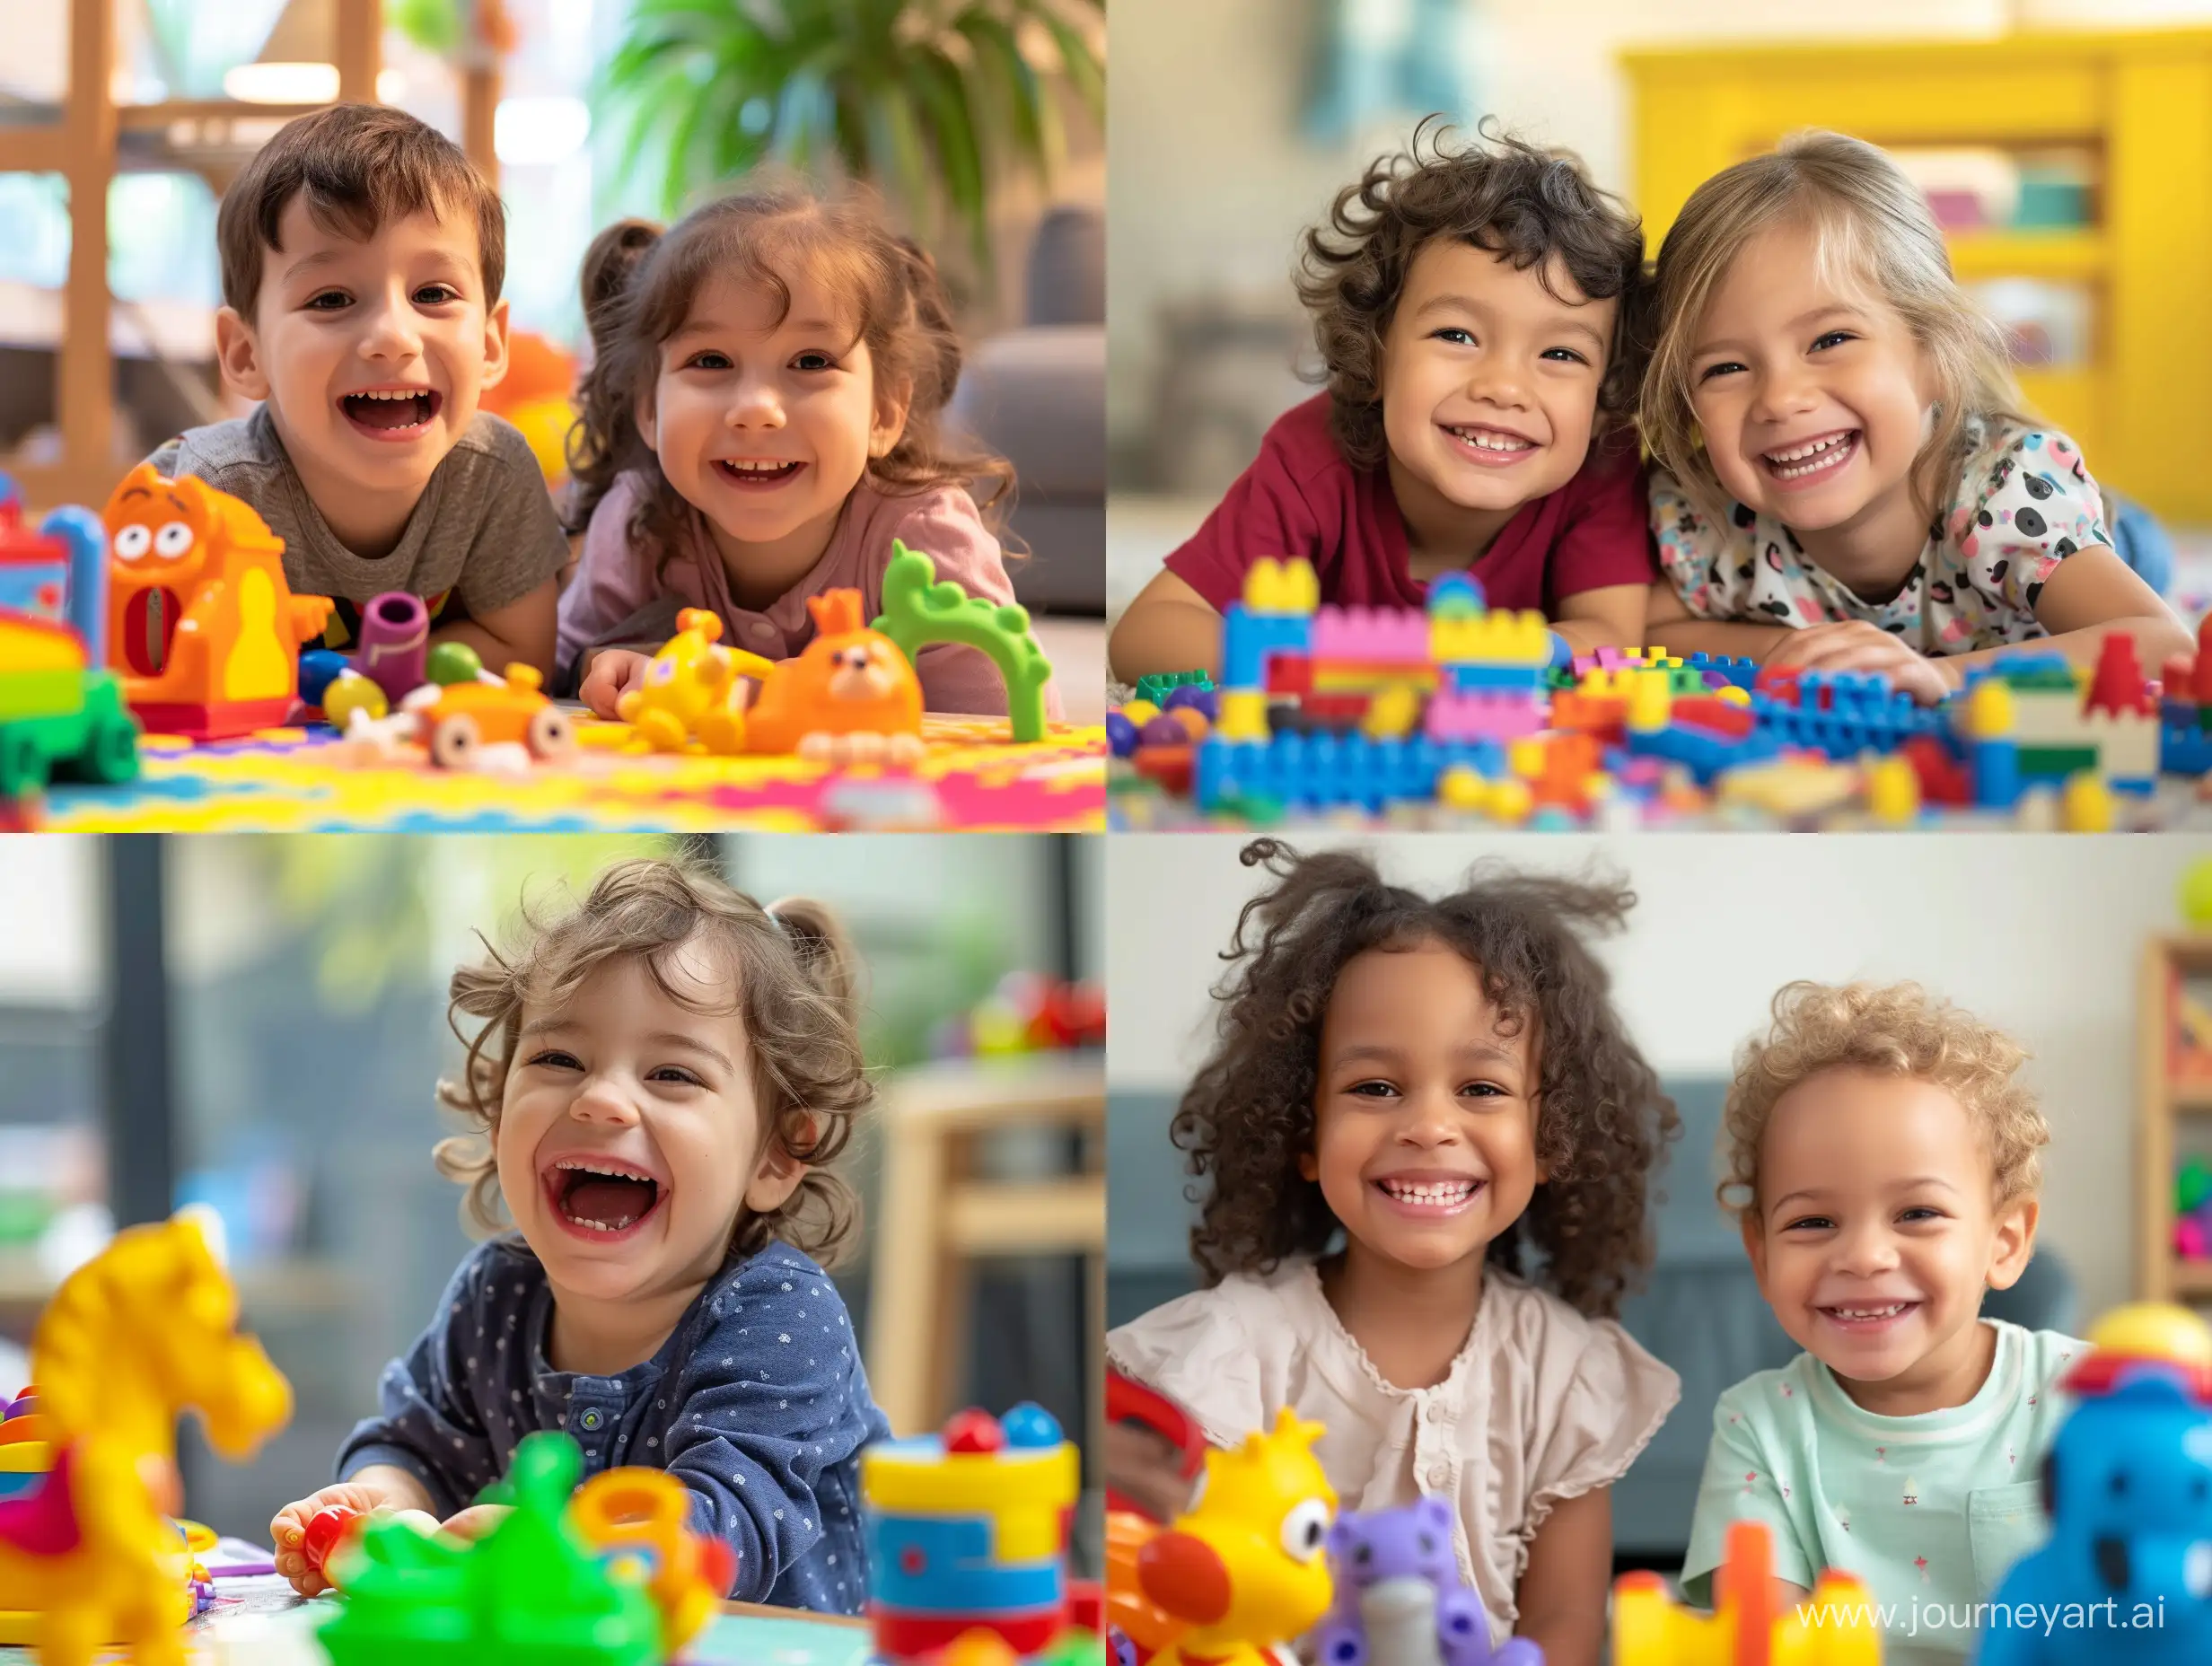 Joyful-Kids-Playing-with-Toys-Capturing-Smiles-and-Laughter